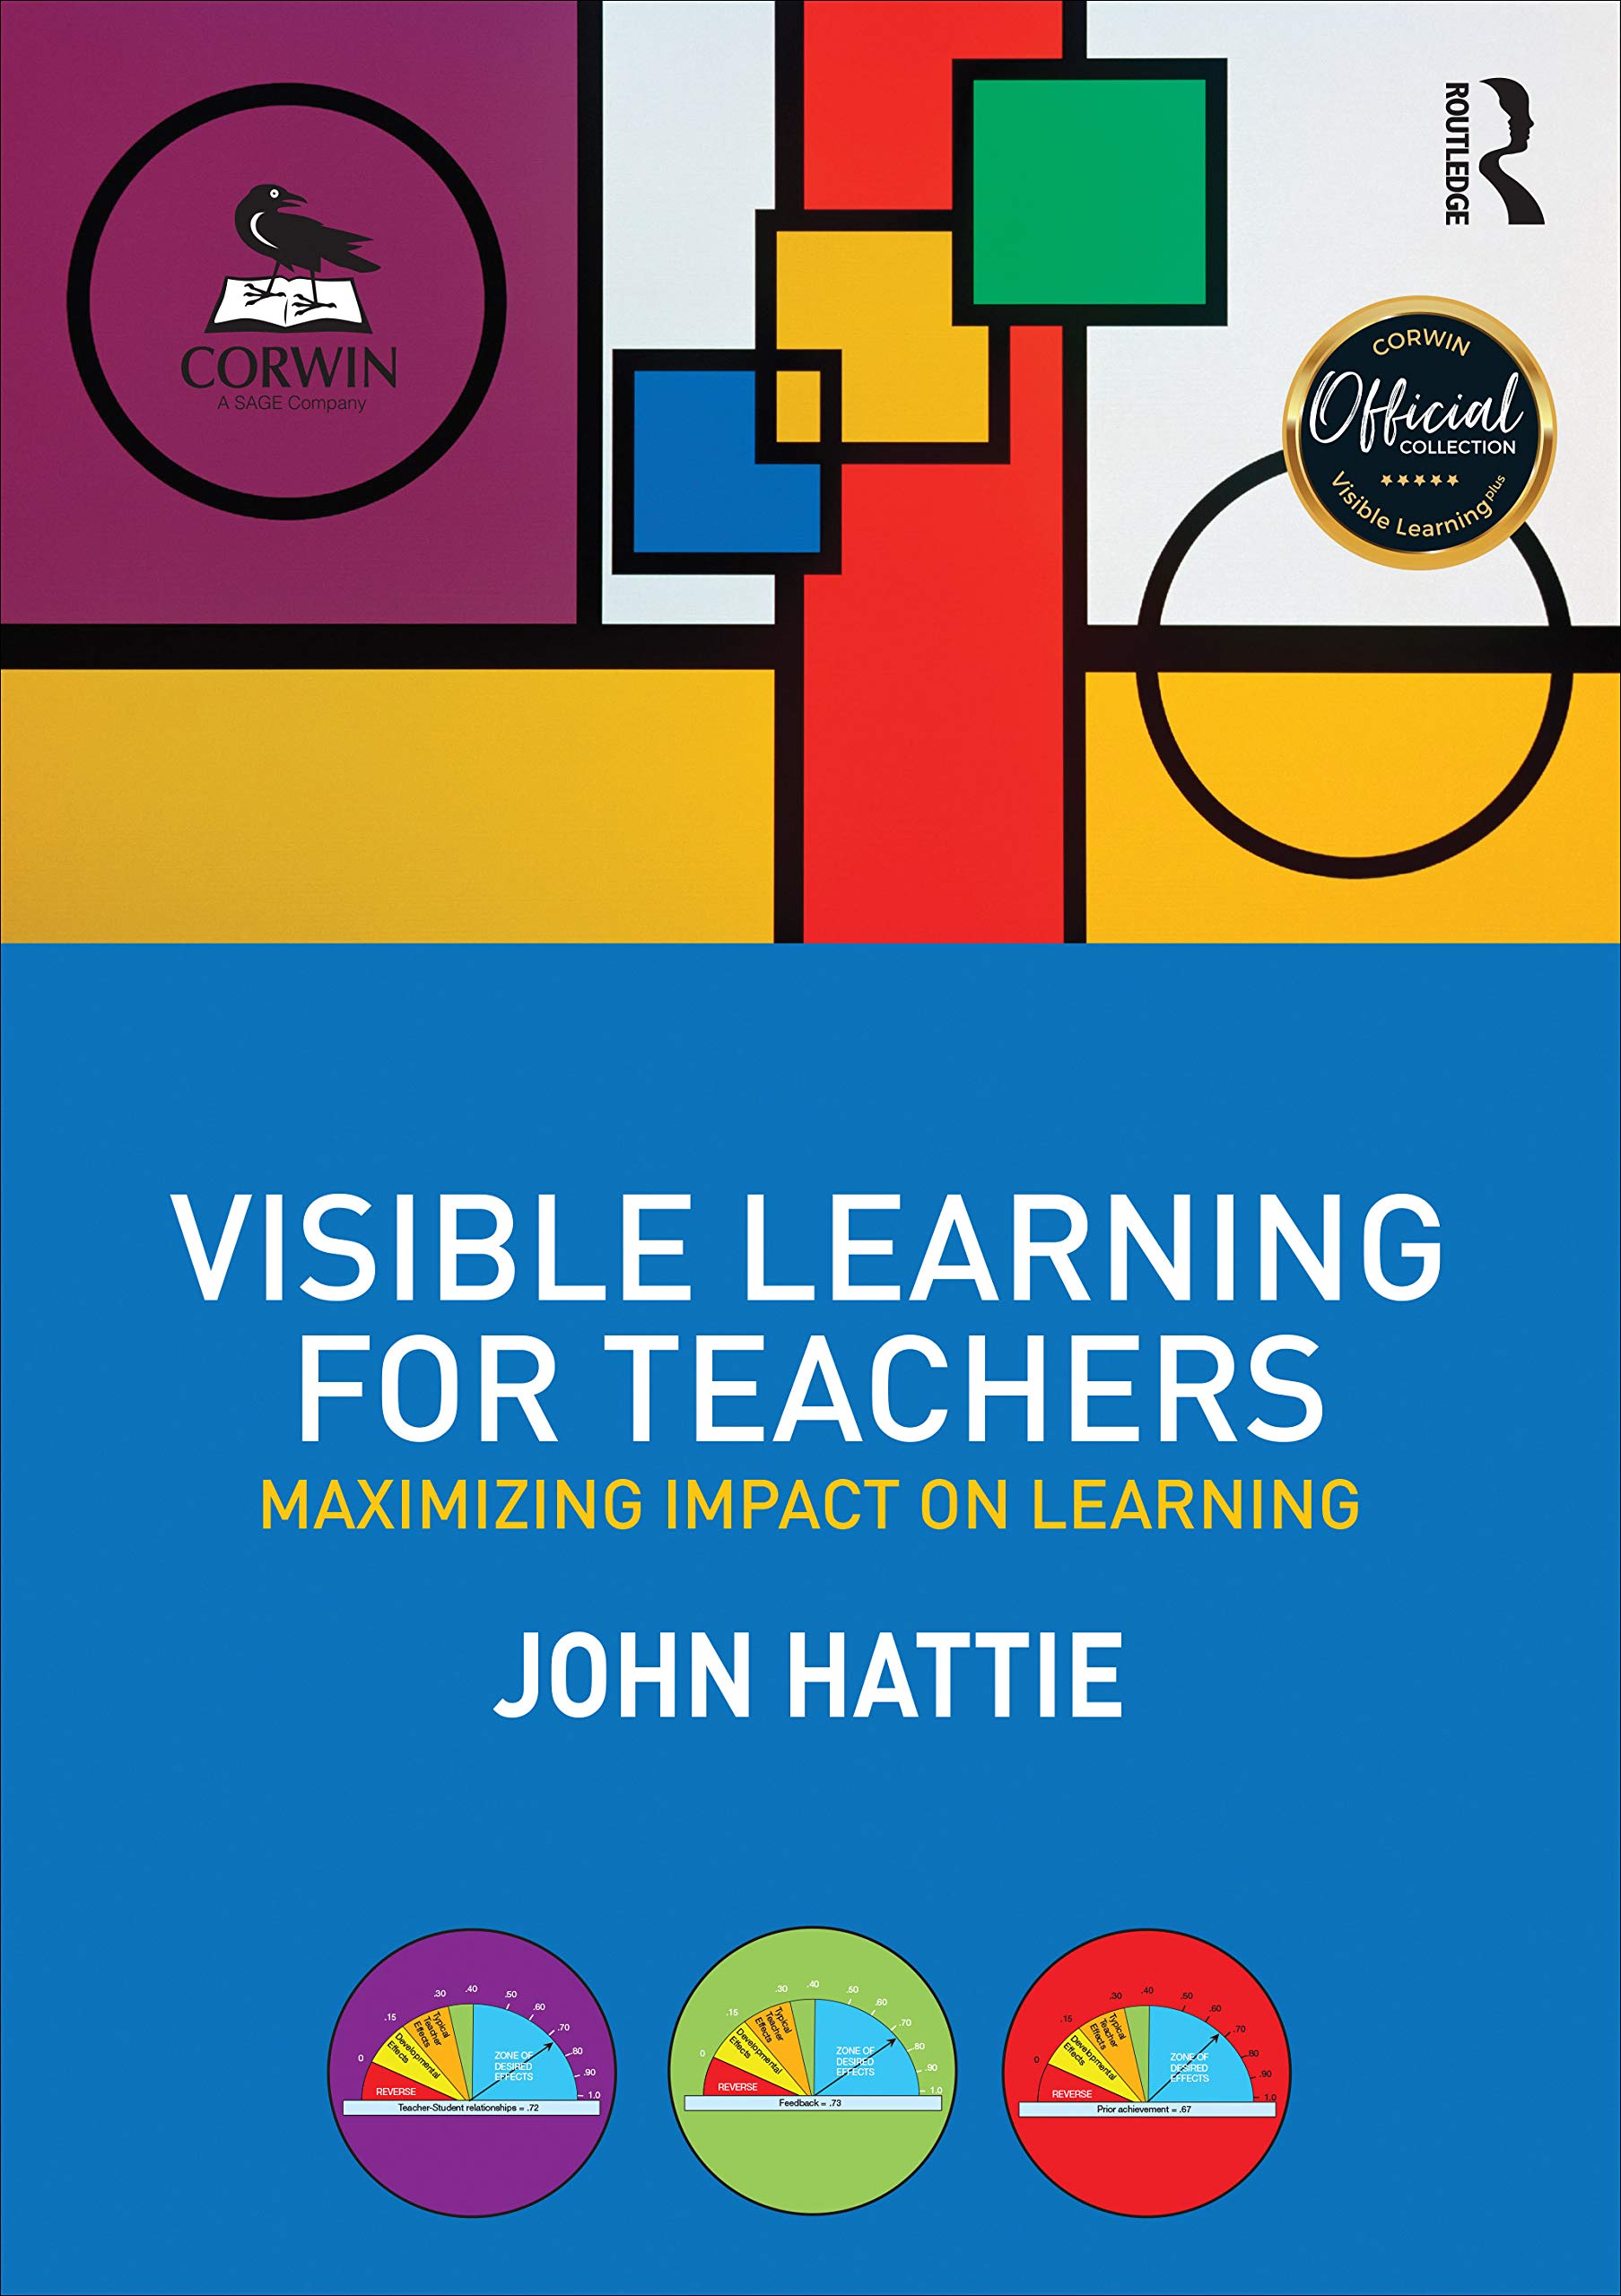 Visible learning